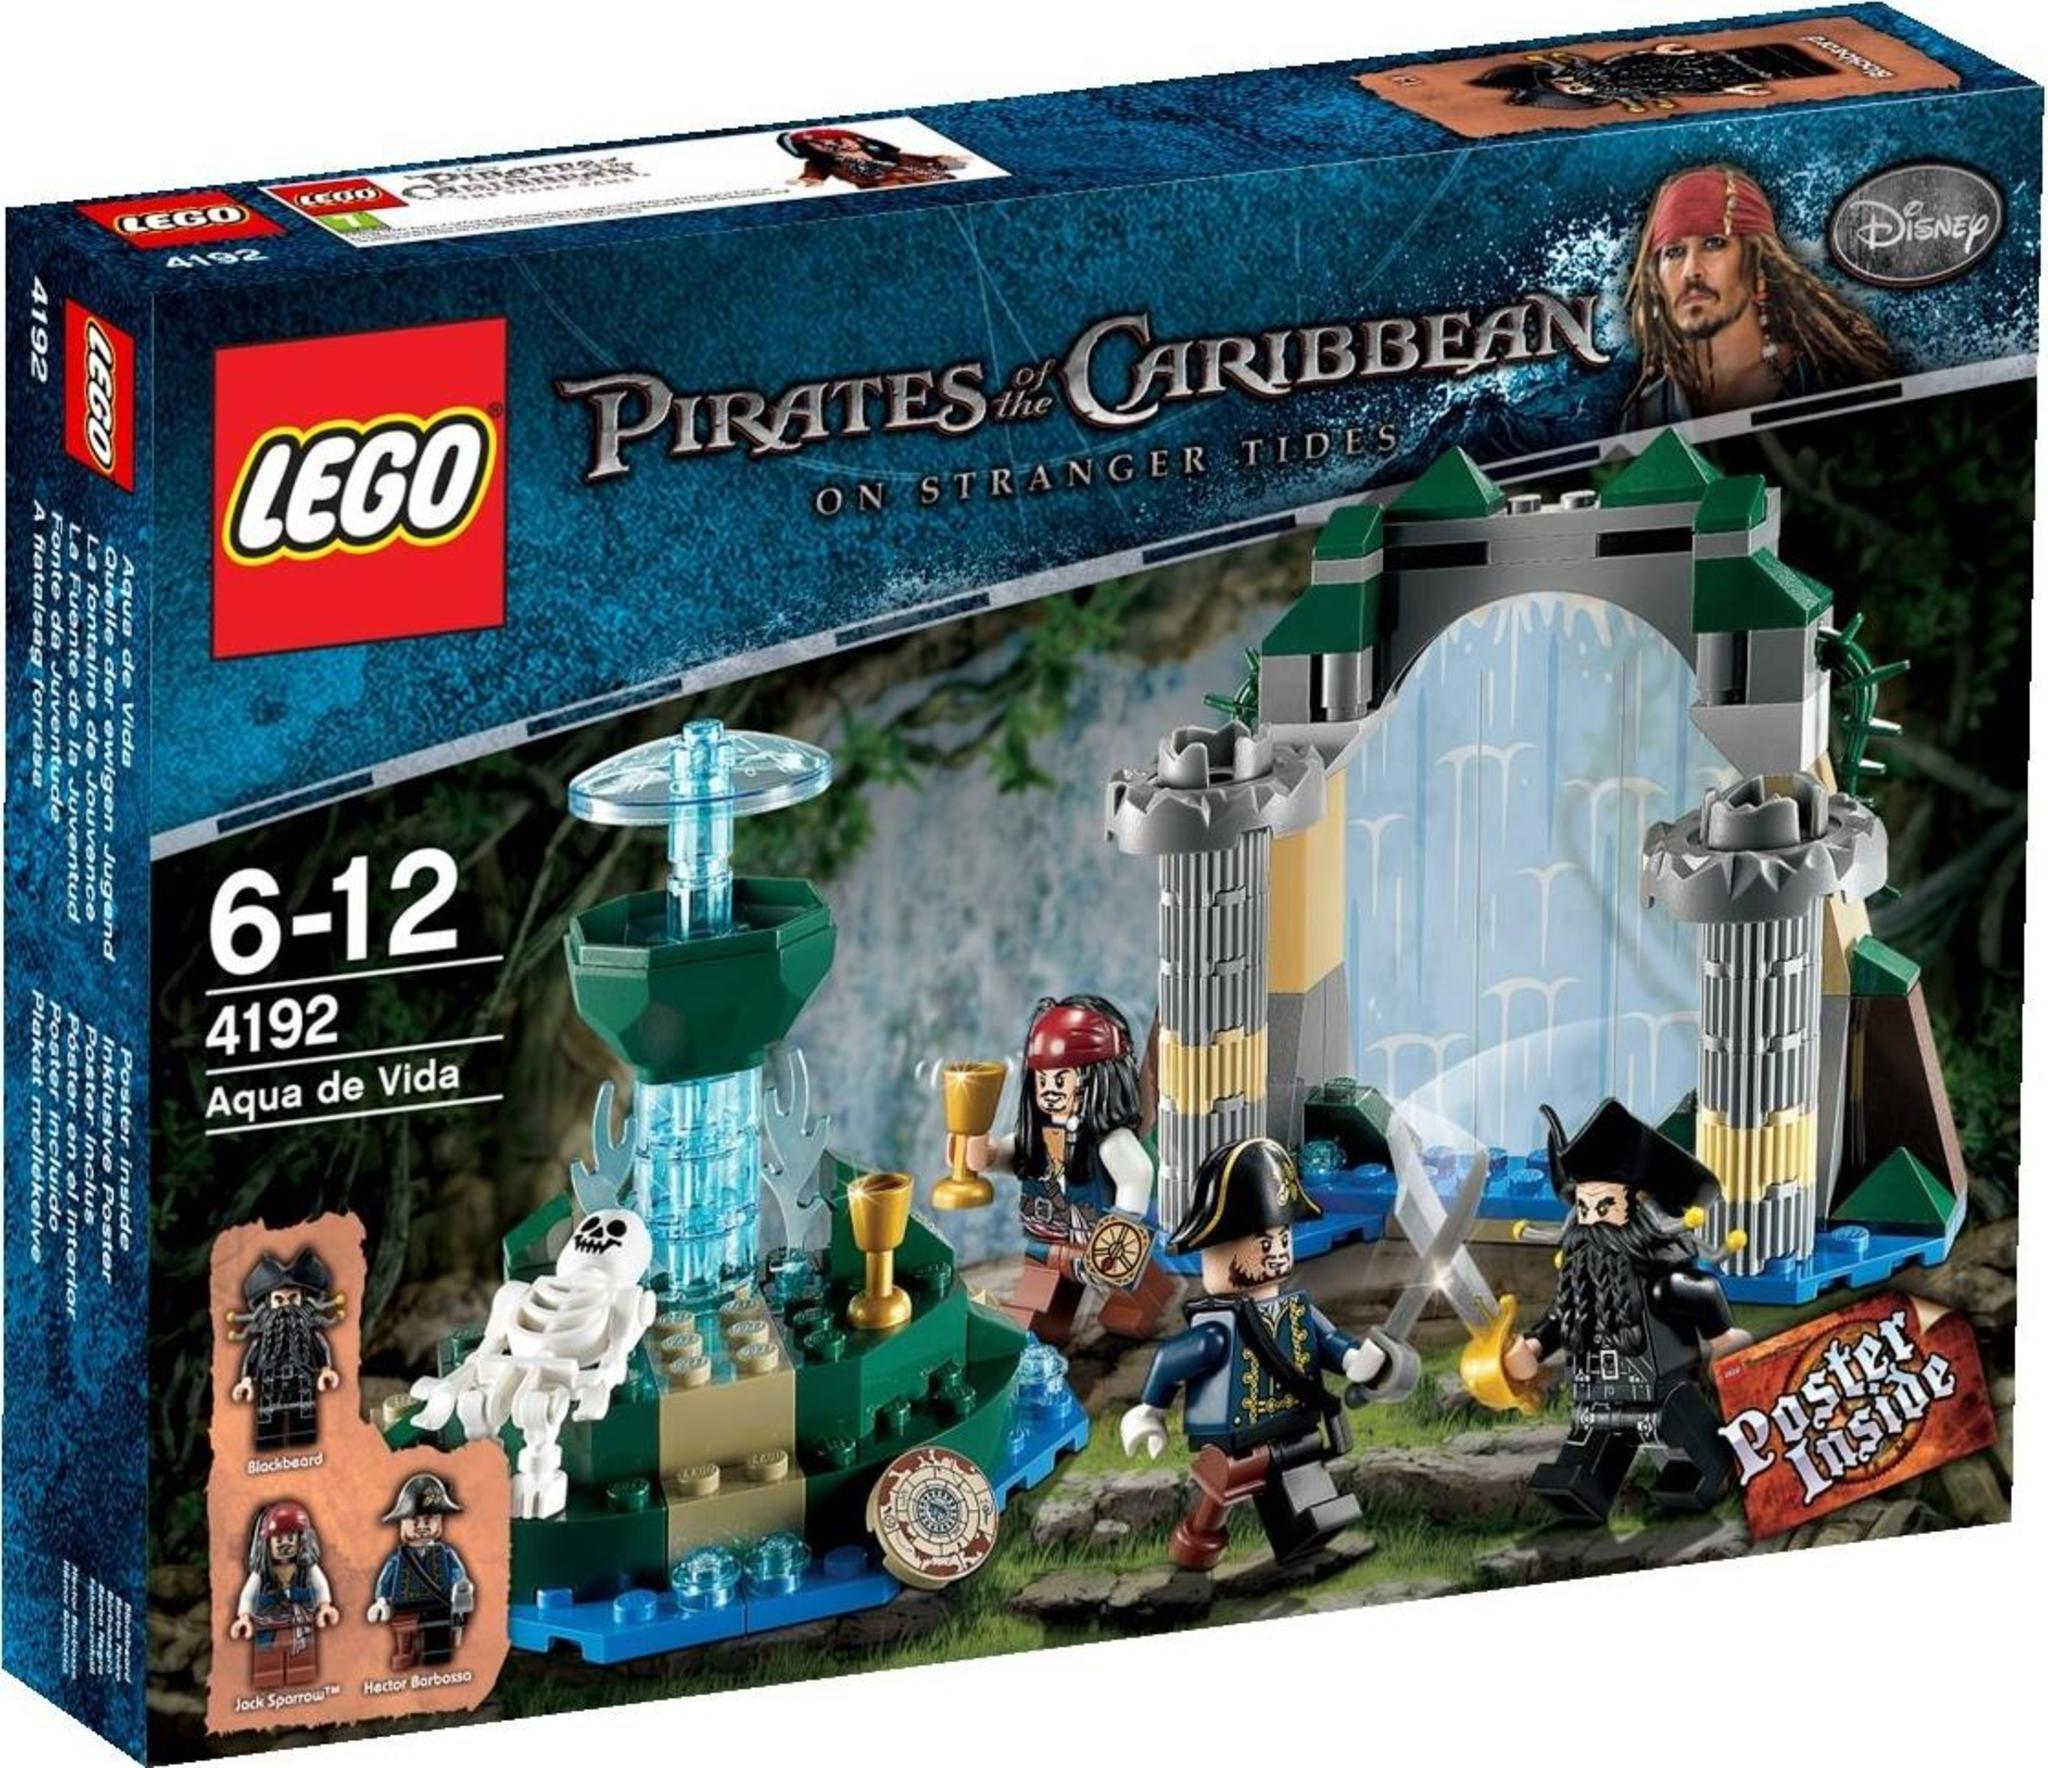 LEGO Pirates of the Caribbean 4192 - Fountain of Youth